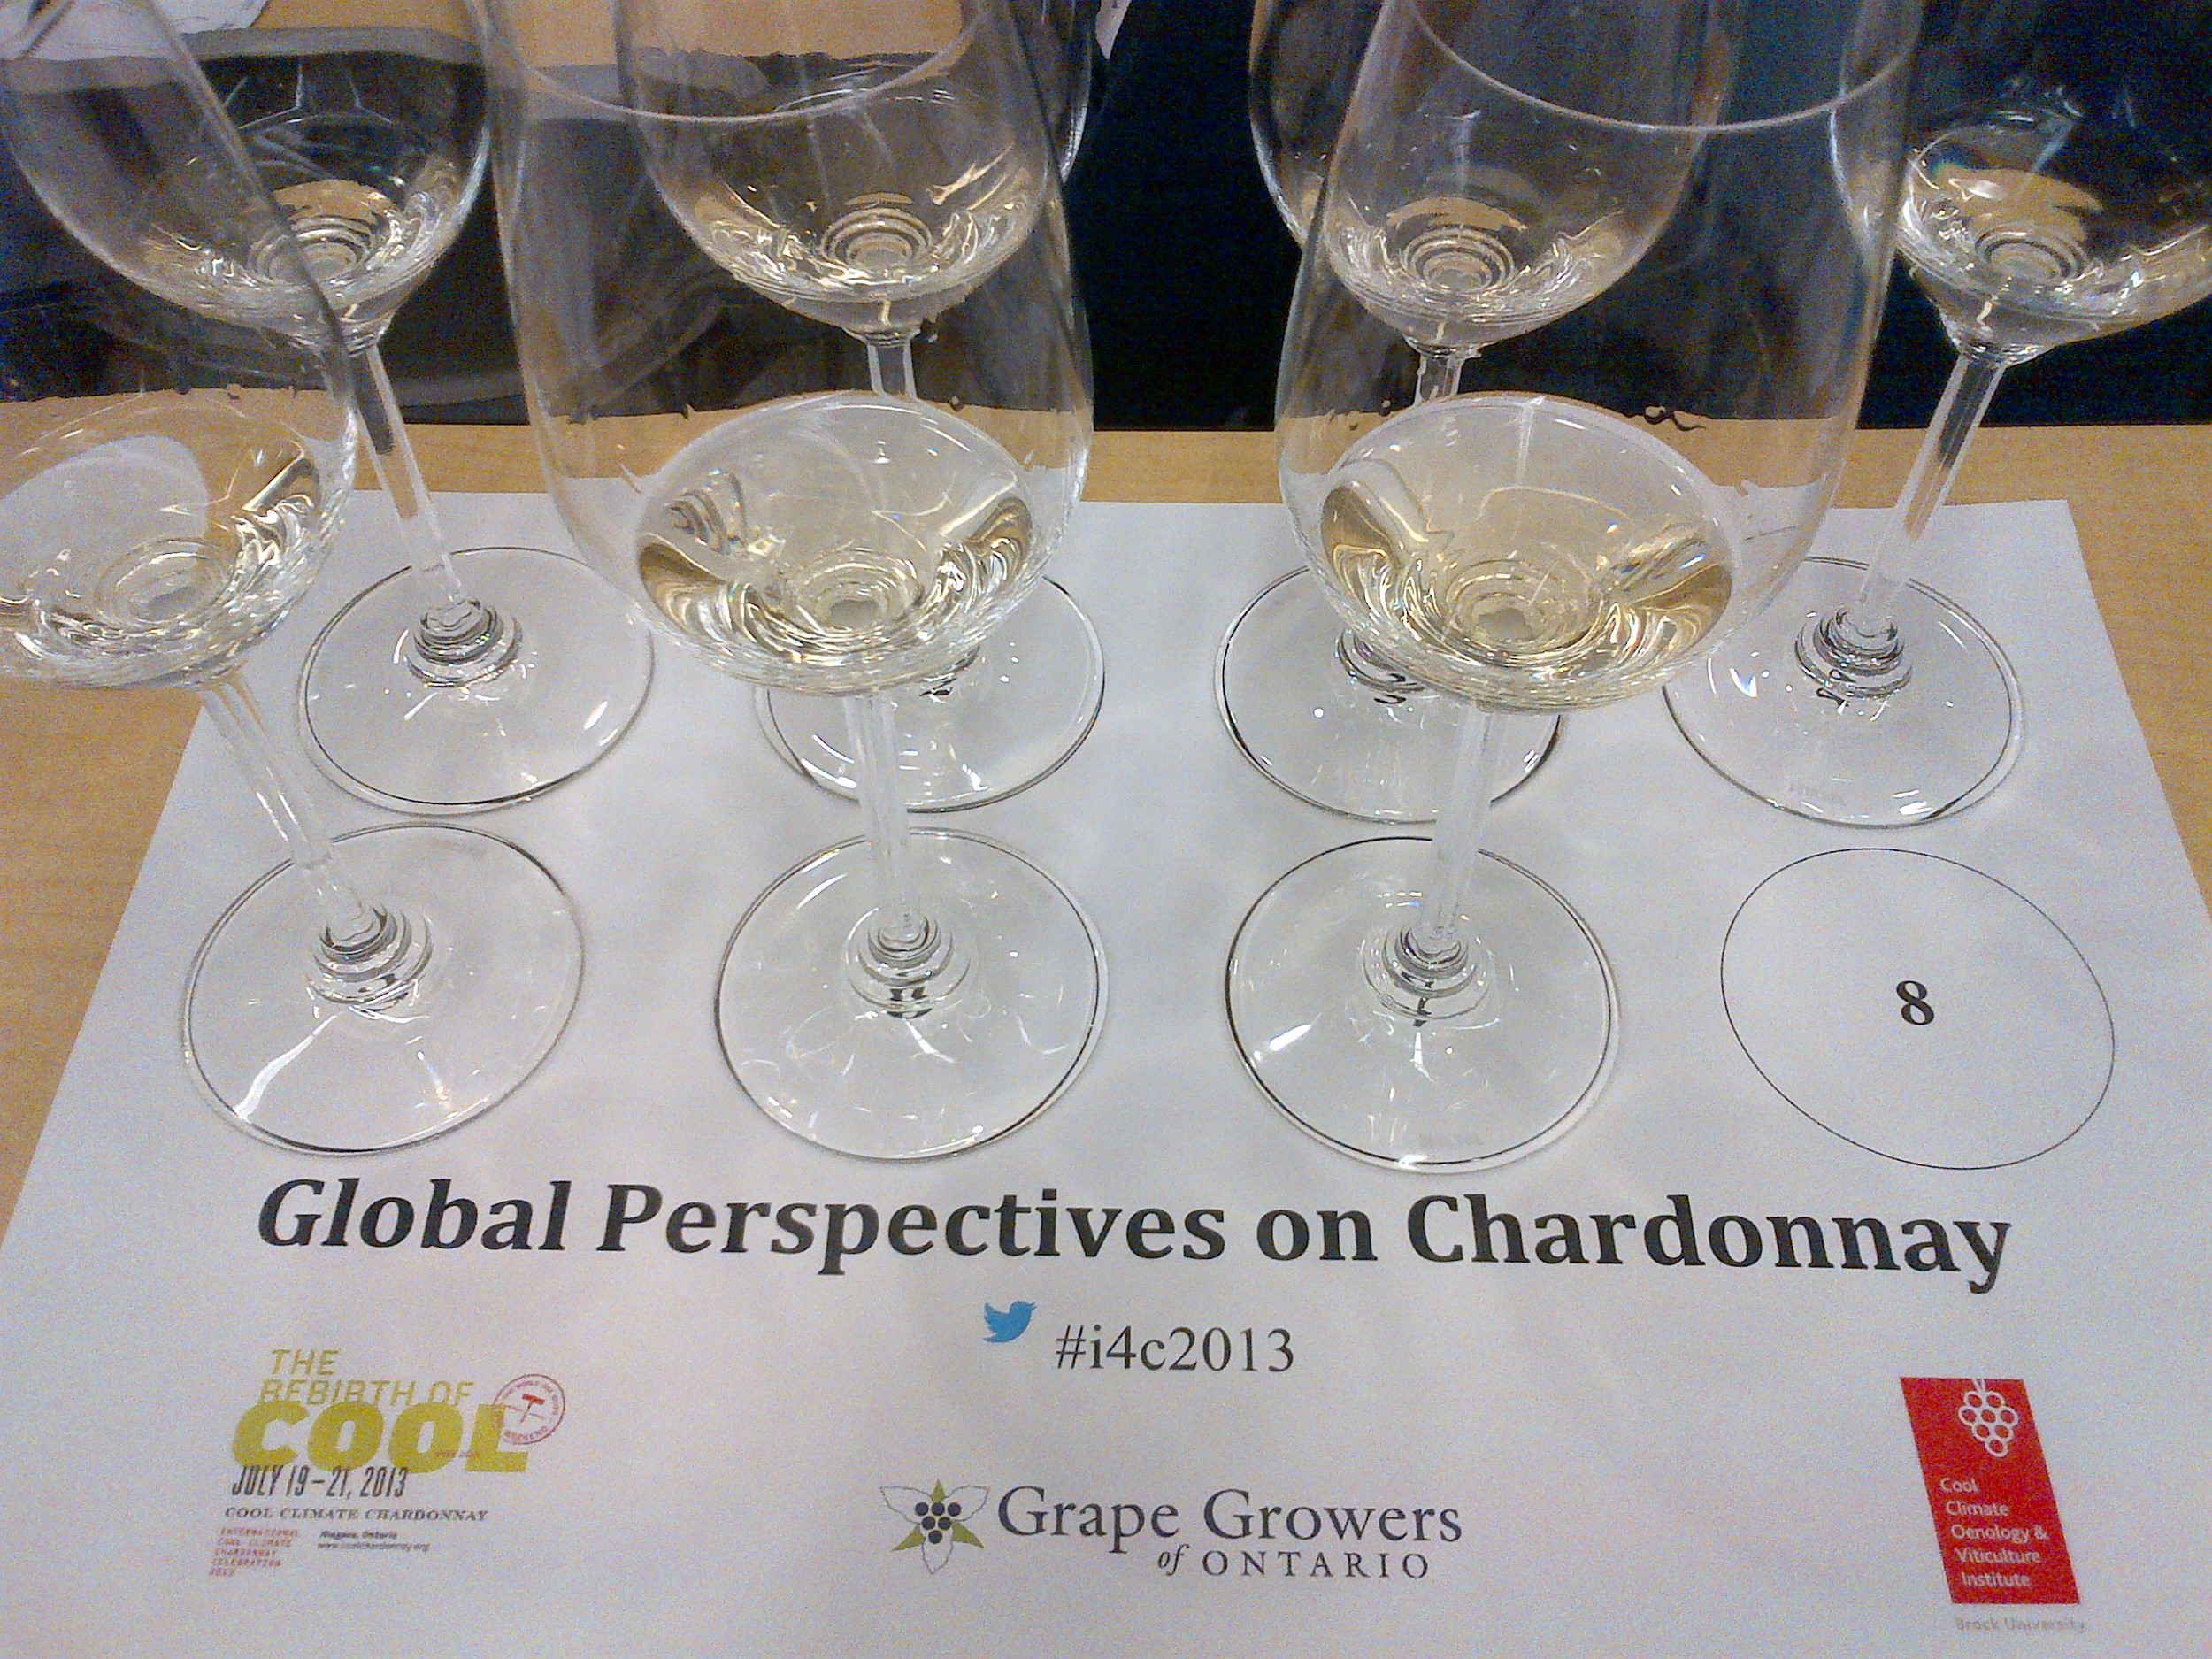  Blind Chardonnay lineup at i4c opening talk moderated by Steven Spurrier. 